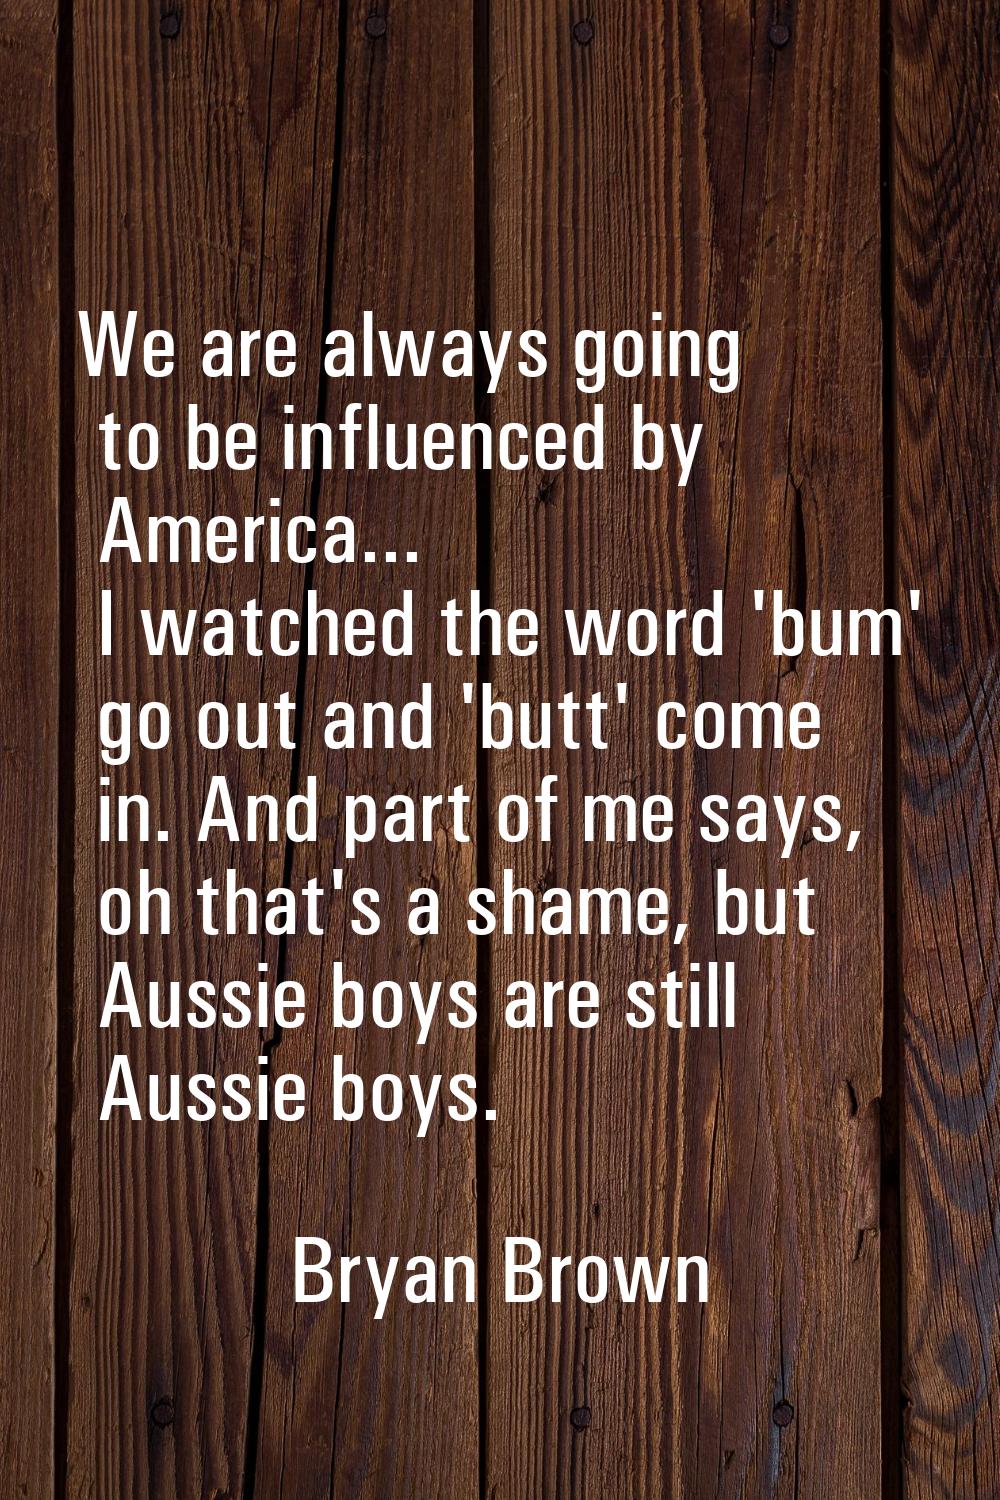 We are always going to be influenced by America... I watched the word 'bum' go out and 'butt' come 